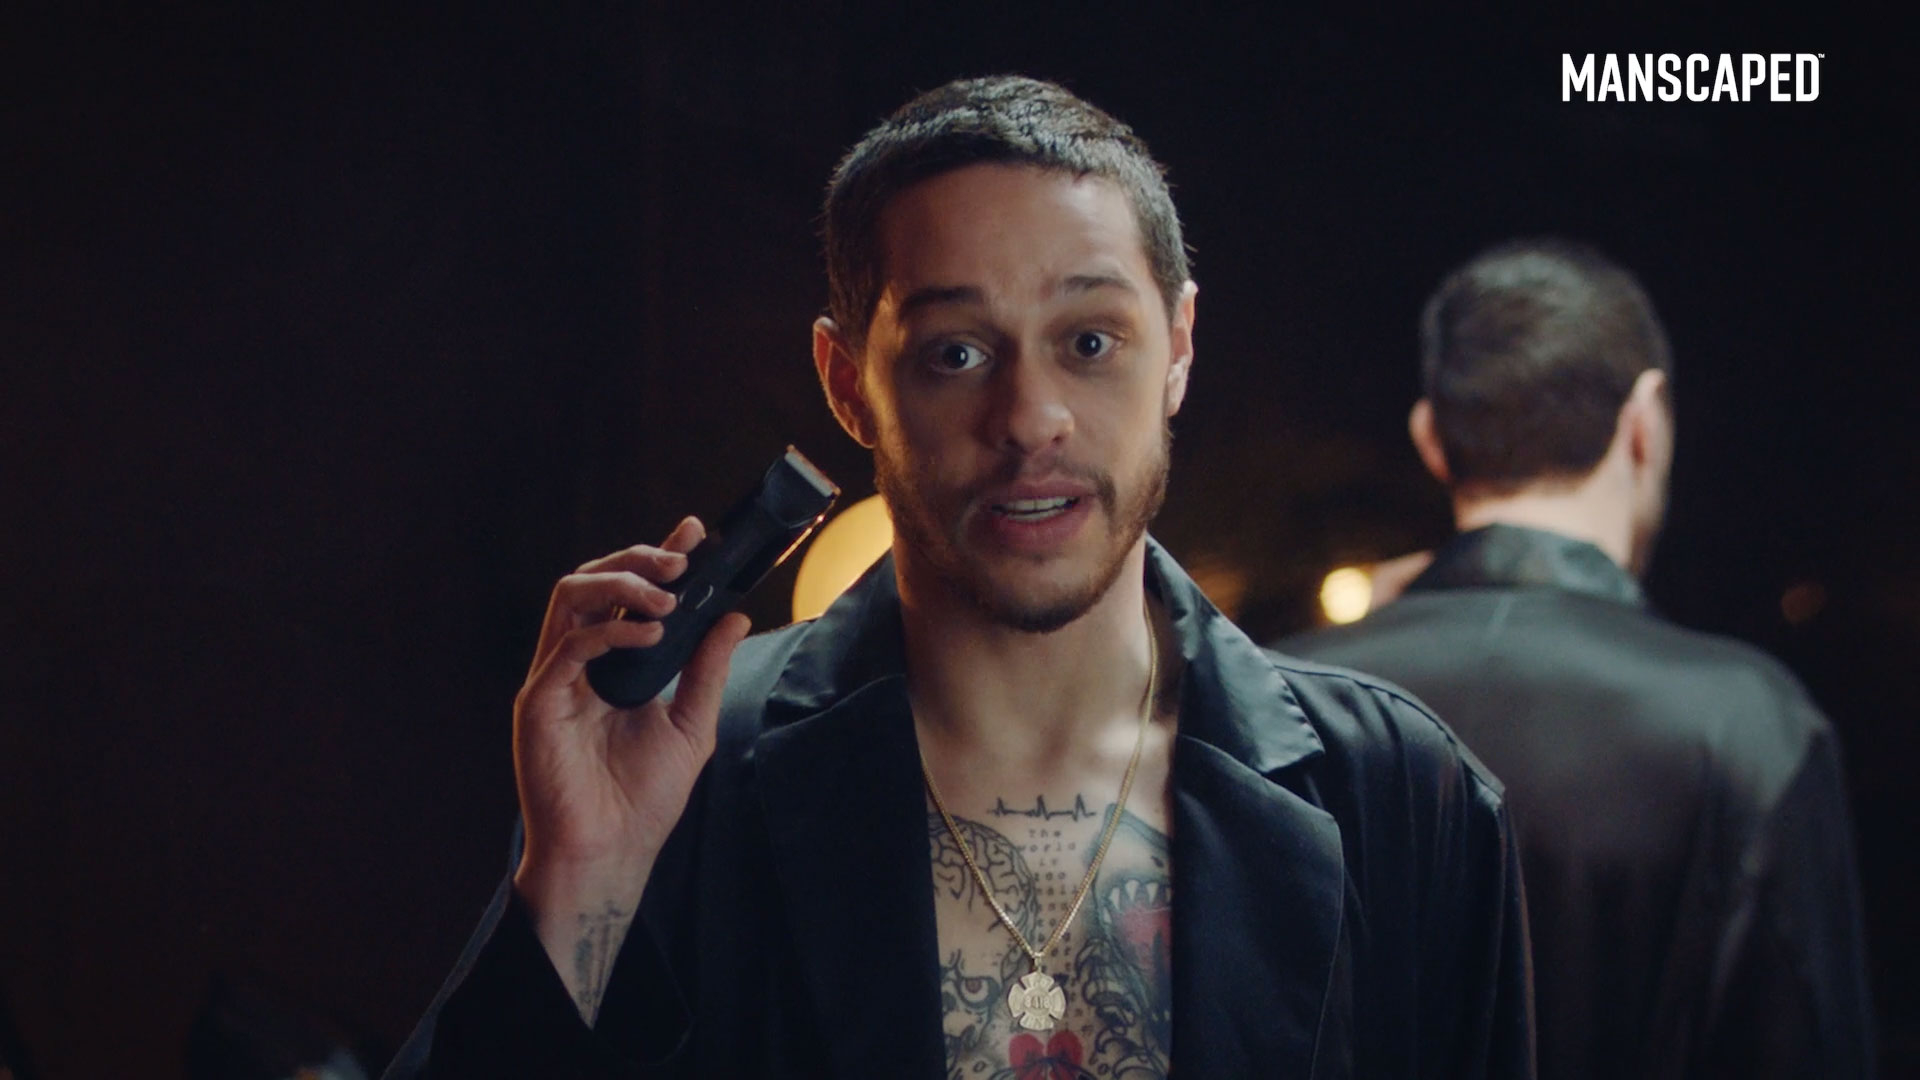 Pete Davidson stars in latest MANSCAPED commercial, officially launching their multi-year partnership.